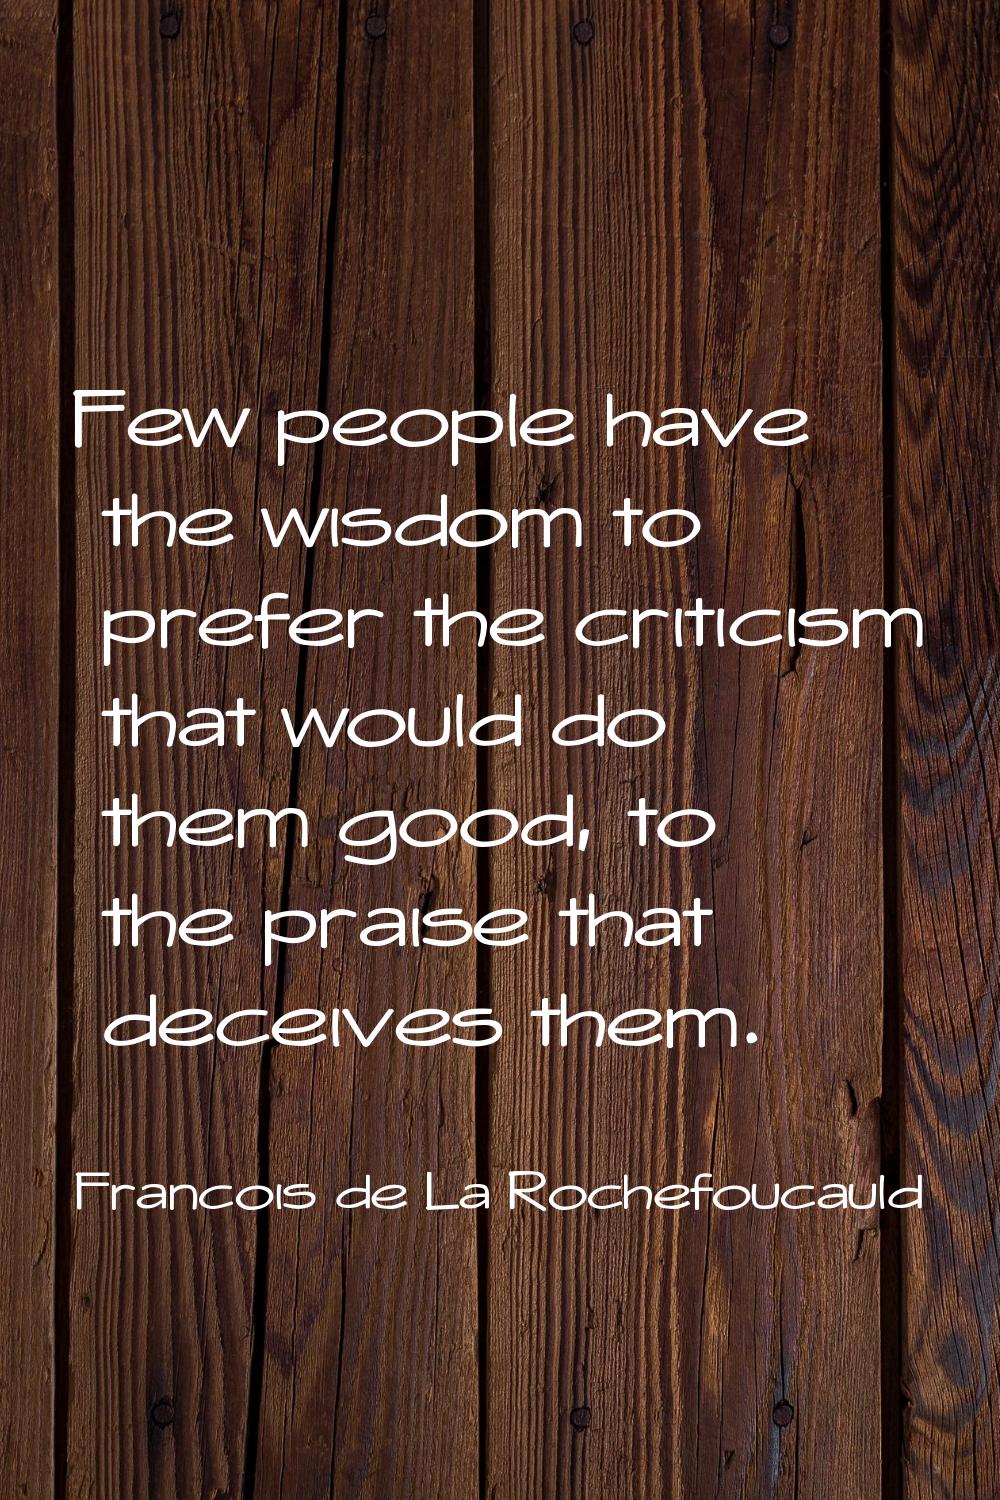 Few people have the wisdom to prefer the criticism that would do them good, to the praise that dece